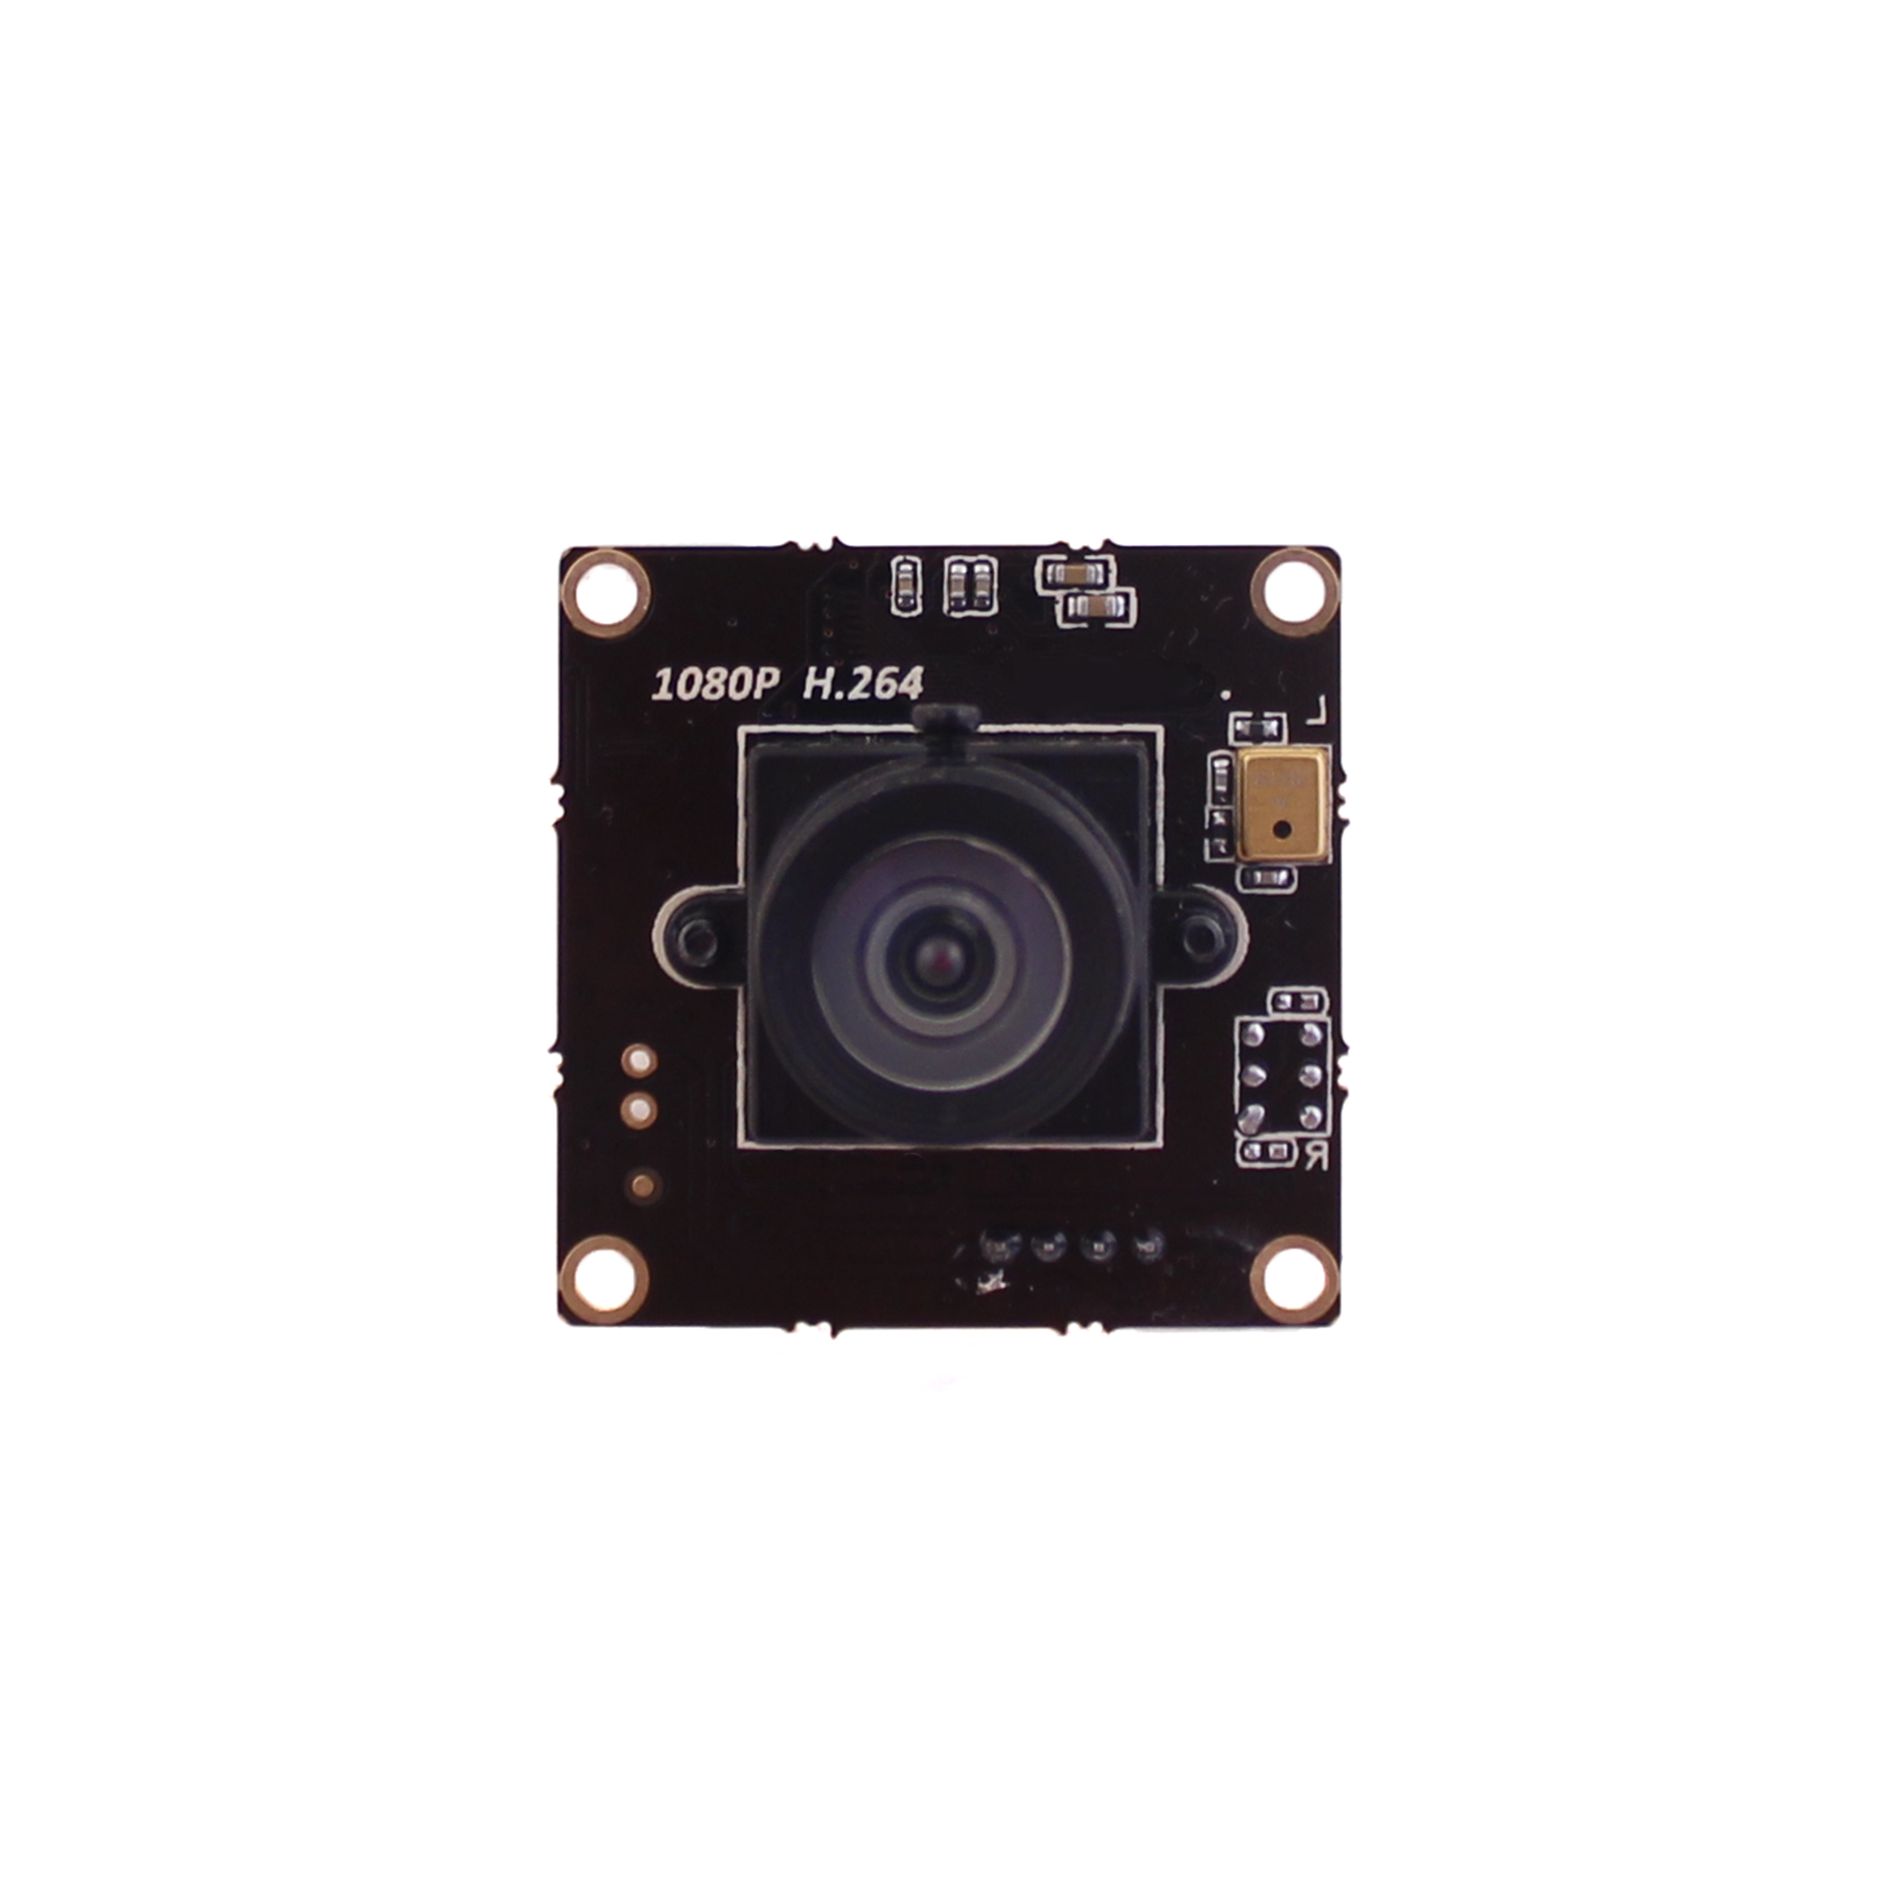 Low-Light HD USB Camera with Wide-Angle, Low Lens